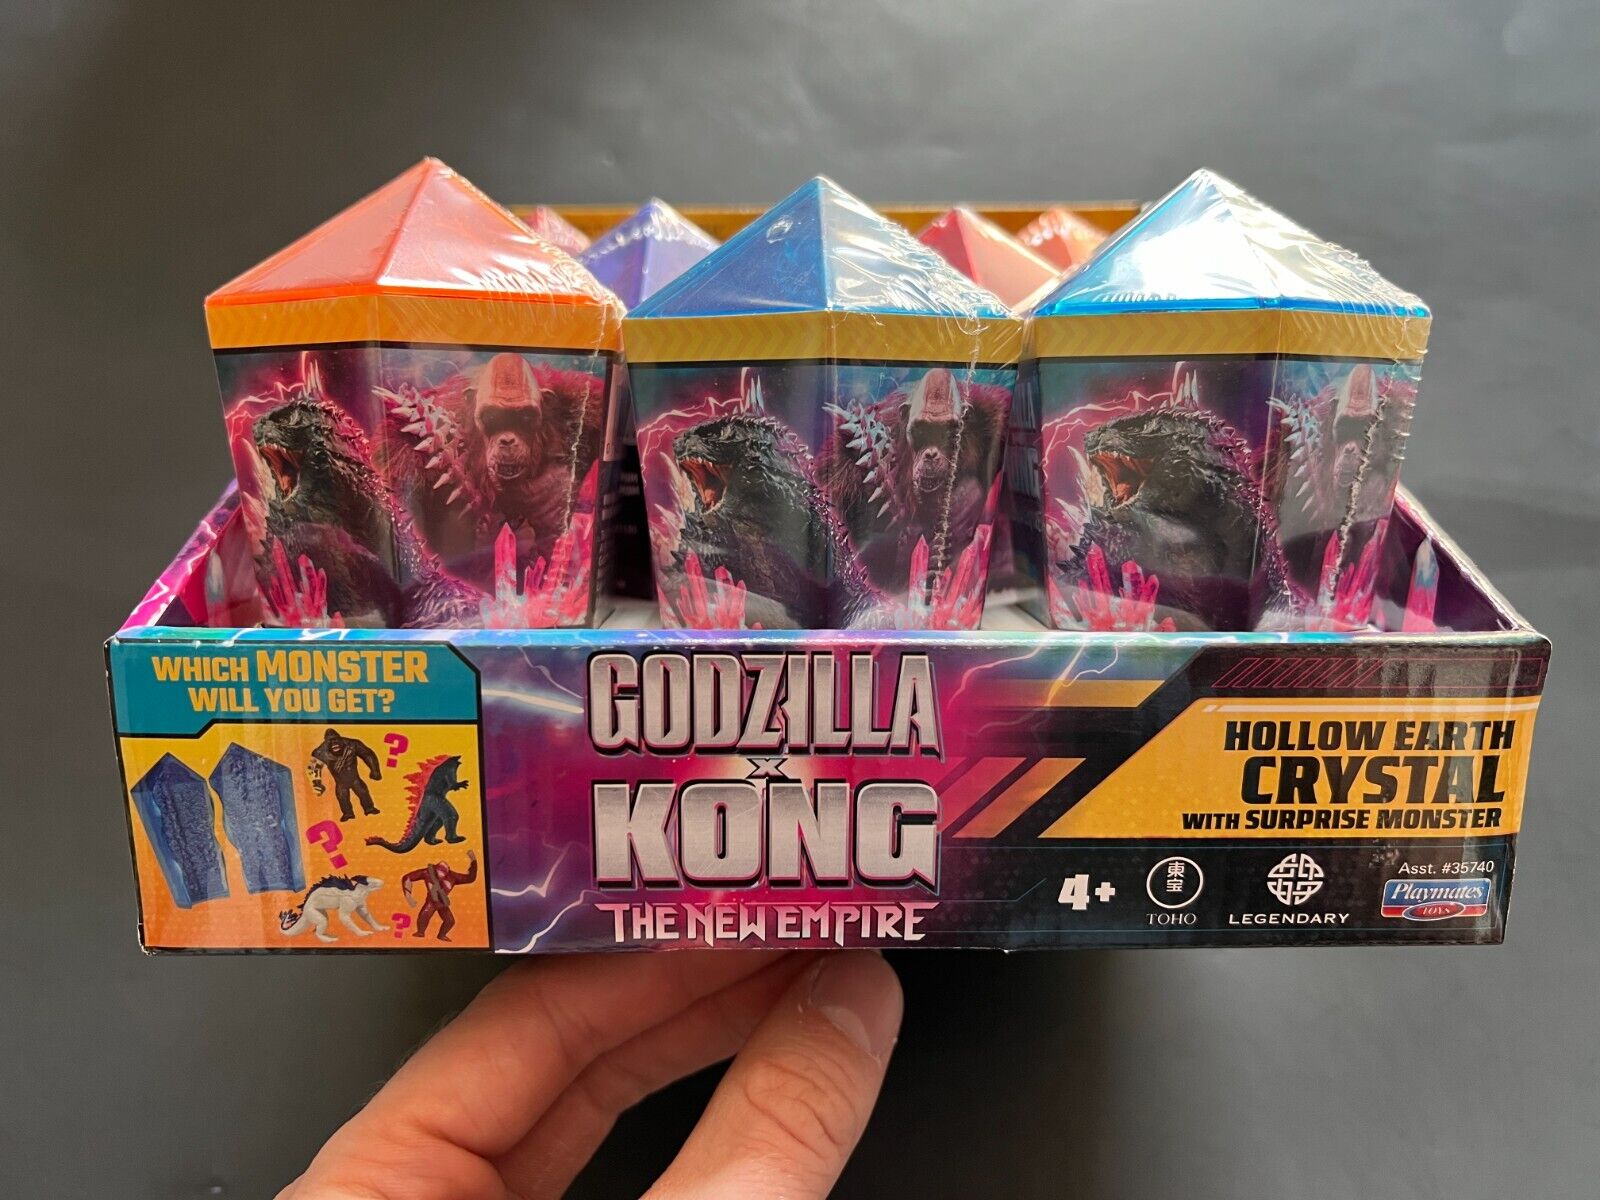 Godzilla x Kong New Empire Hollow Earth Crystal Surprise Monster Display Case x8 Playmates